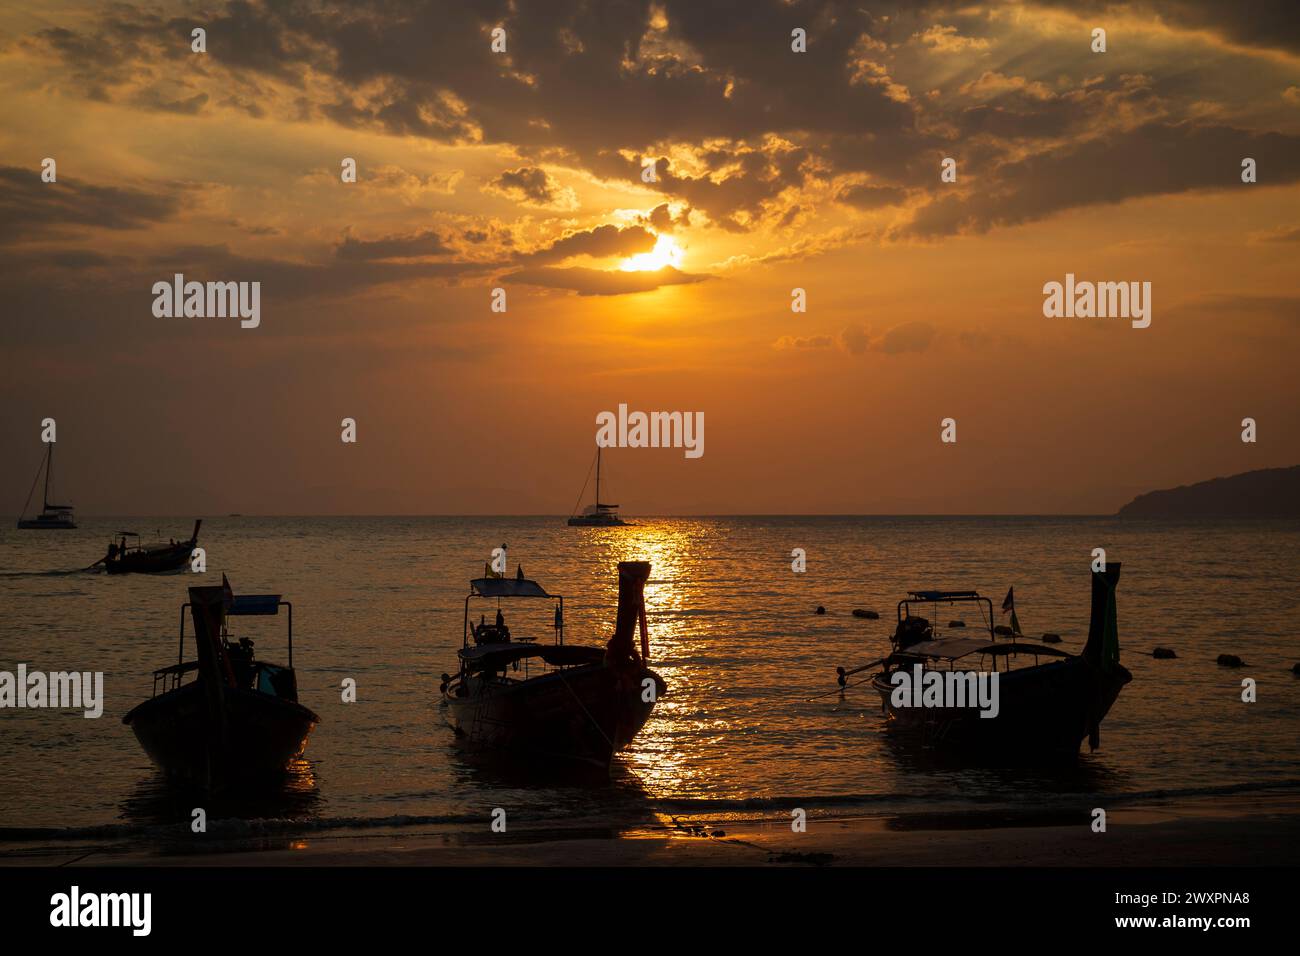 Beautiful view of silhouette of long-tail boats, sea and stunning orange sky during sunset at the Railay West Beach in Railay, Krabi, Thailand. Stock Photo